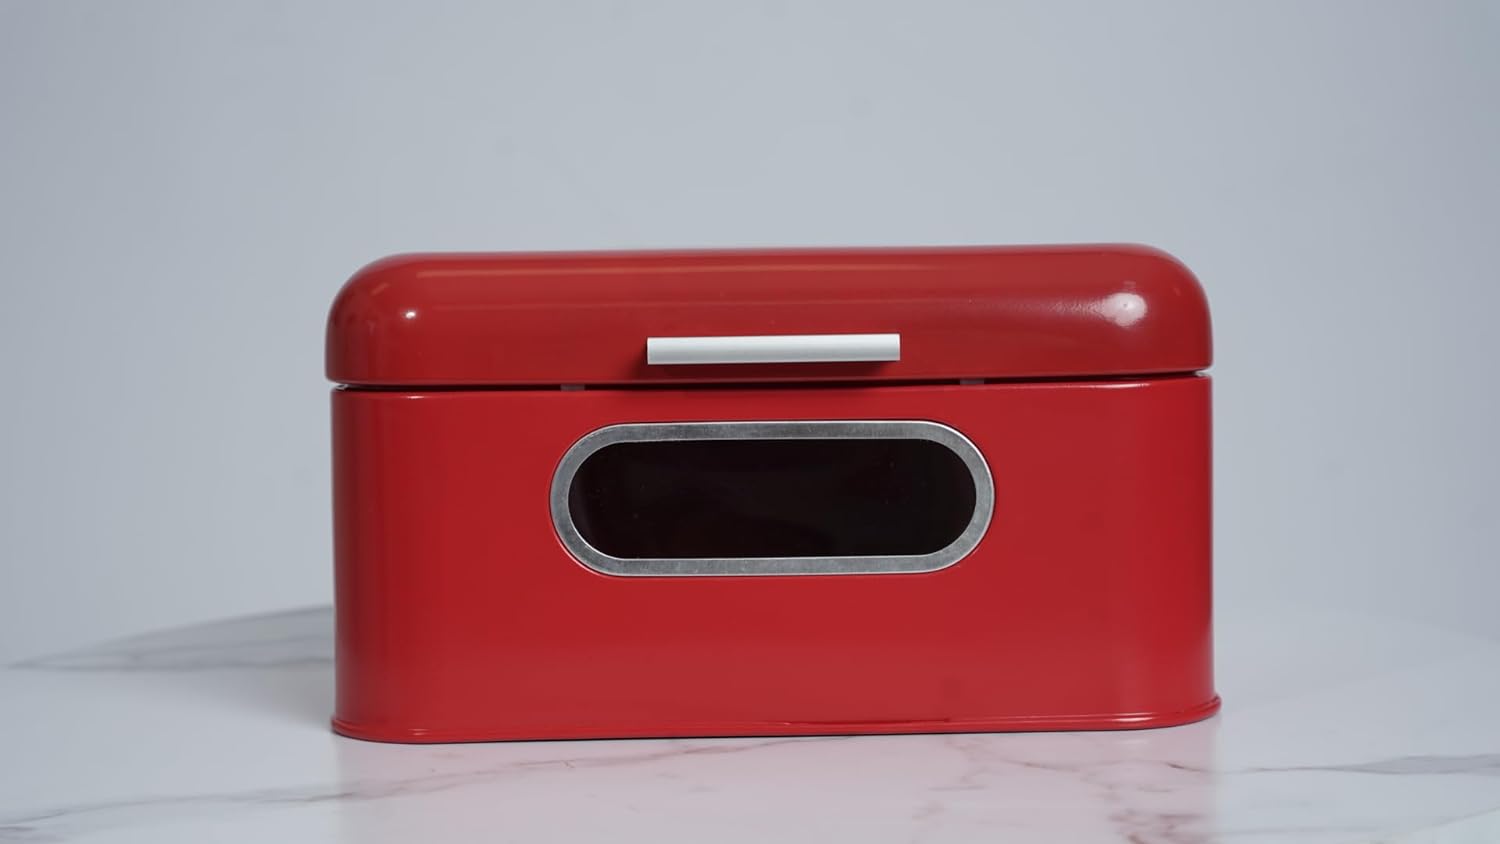 Red Metal Bread Box with Lid and Transparent Window, 11.8" - 1